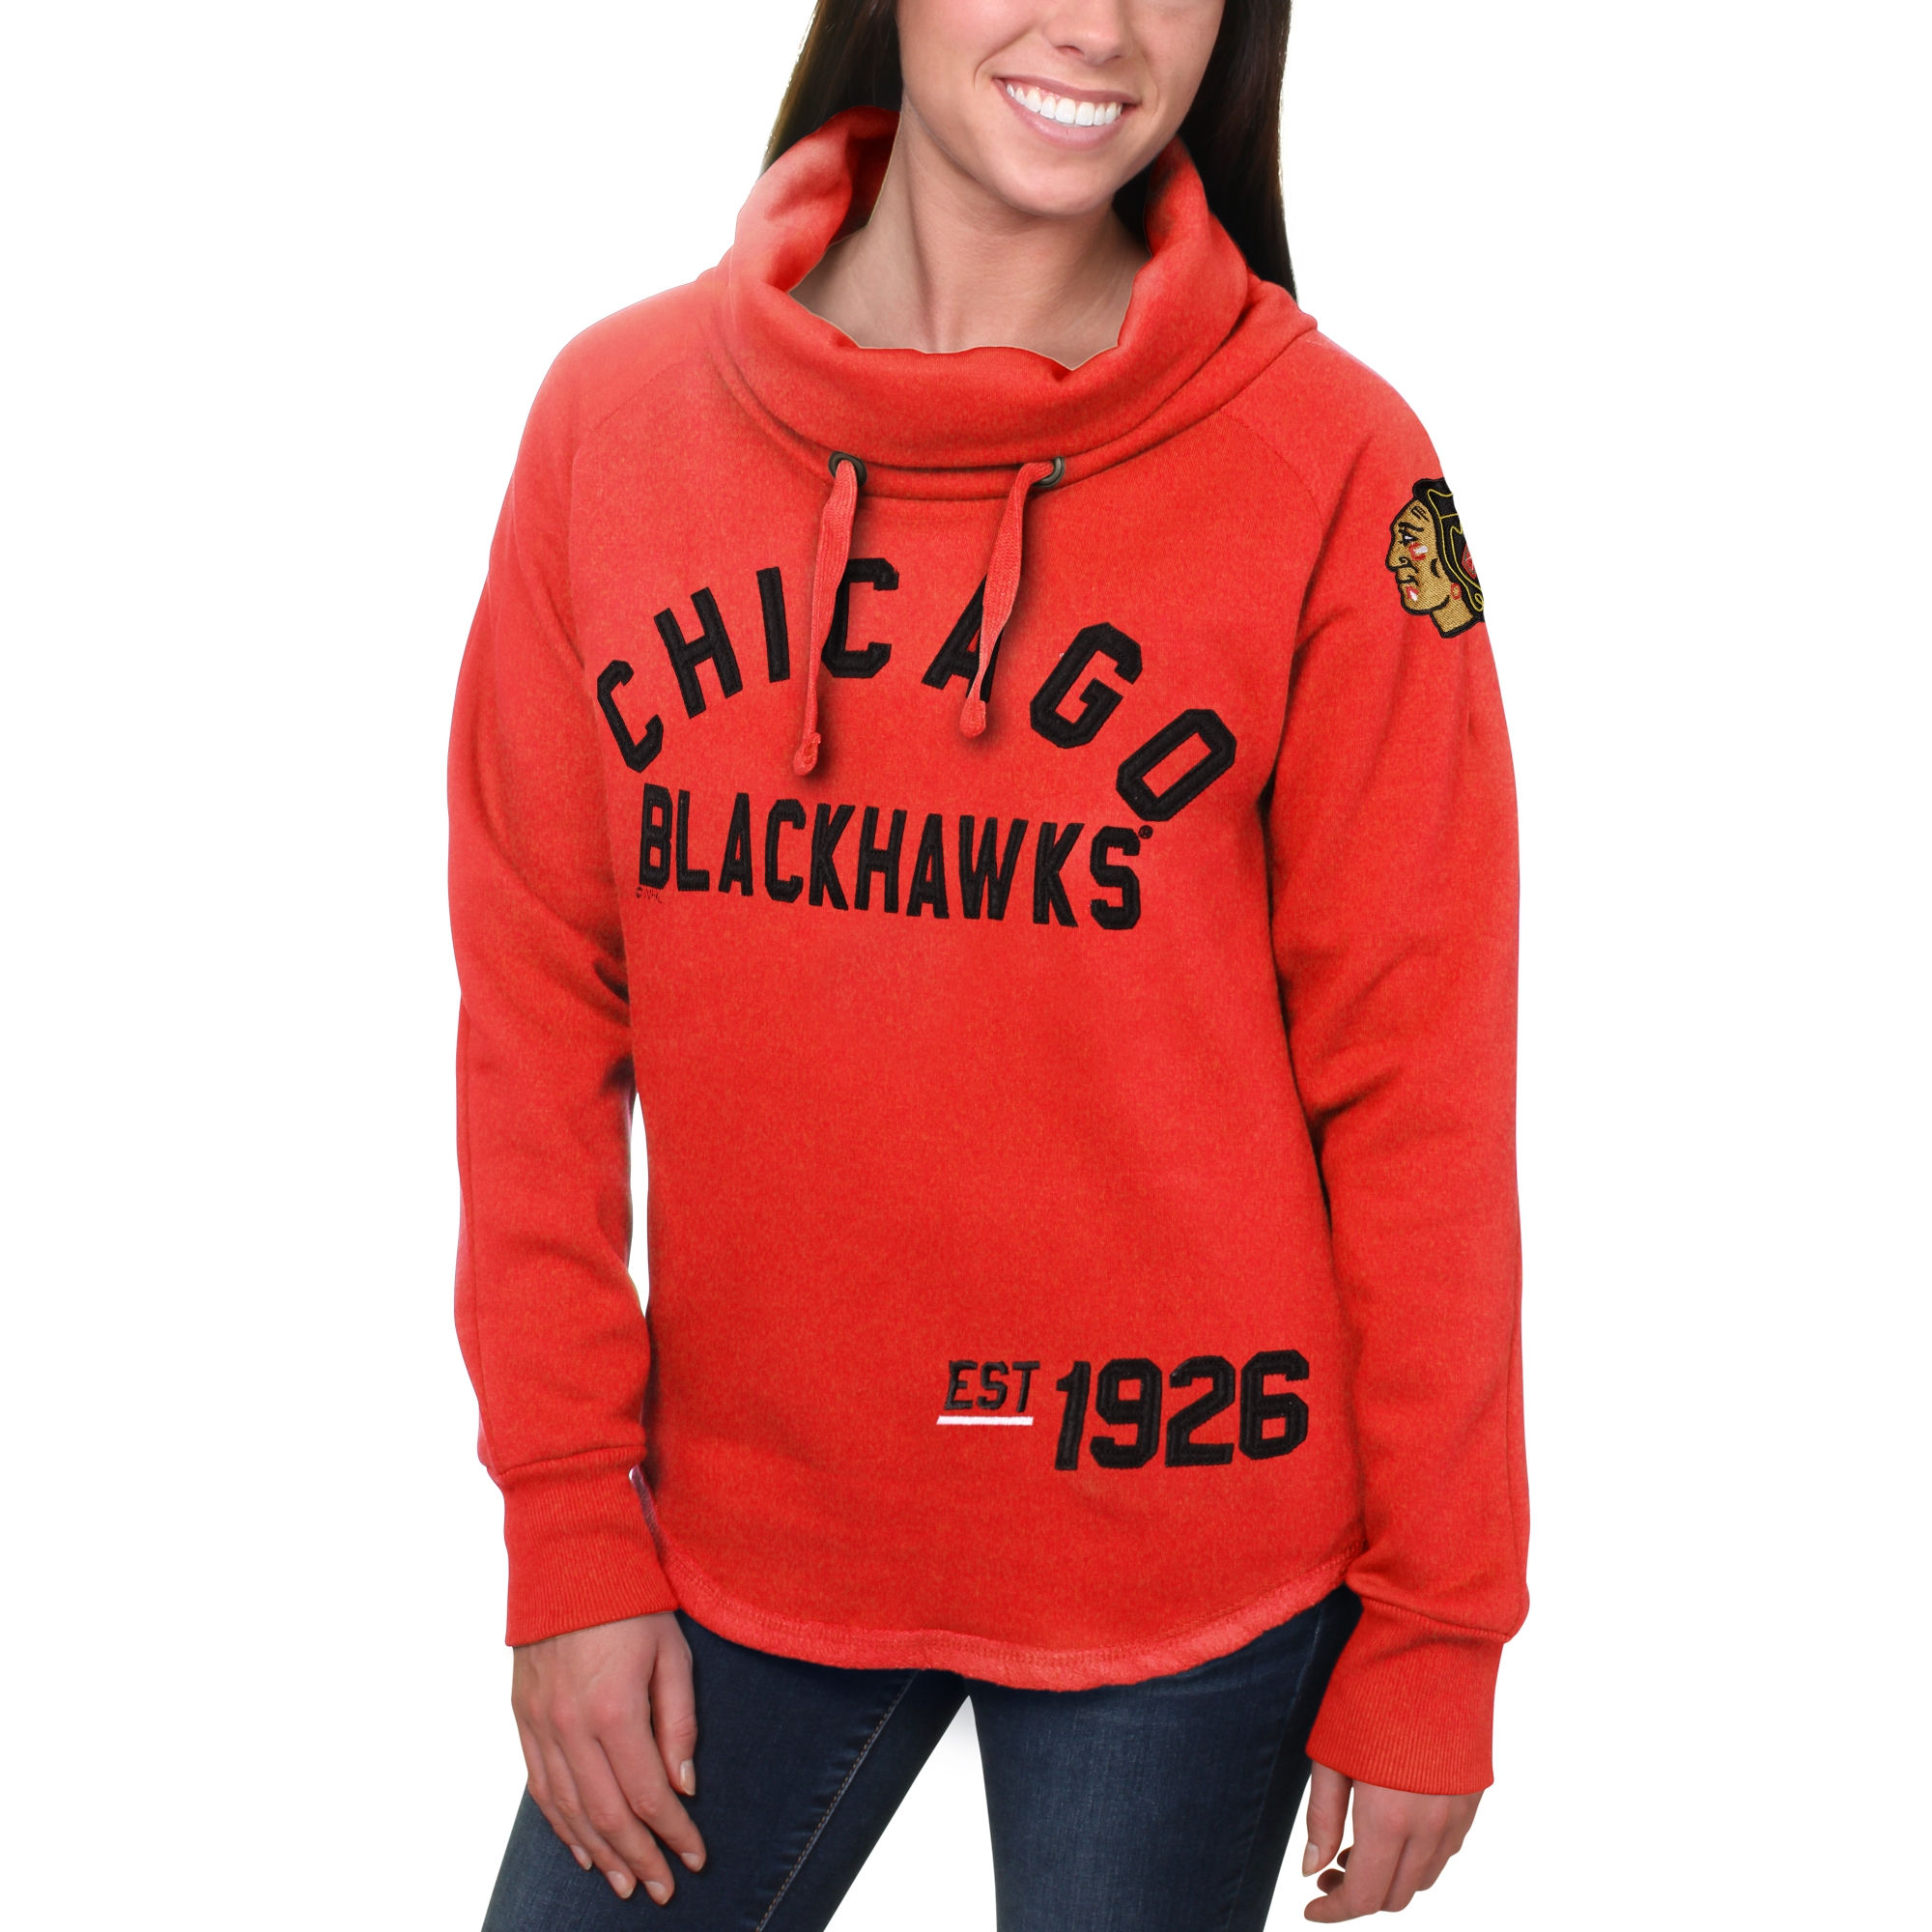 Blackahawks Red Women's Customized All Stitched Hooded Sweatshirt